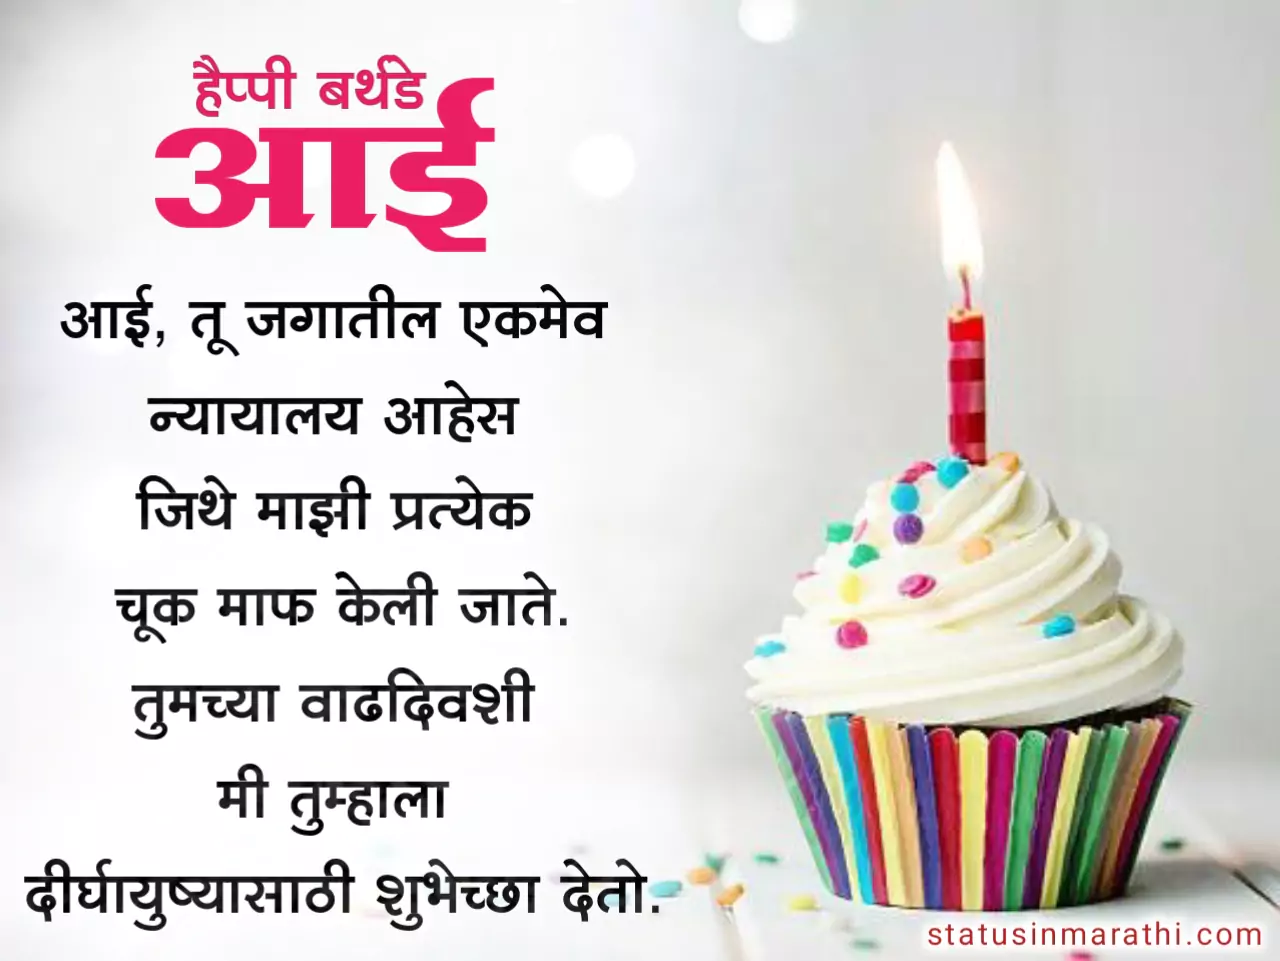 Happy Birthday Quotes for mother in marathi